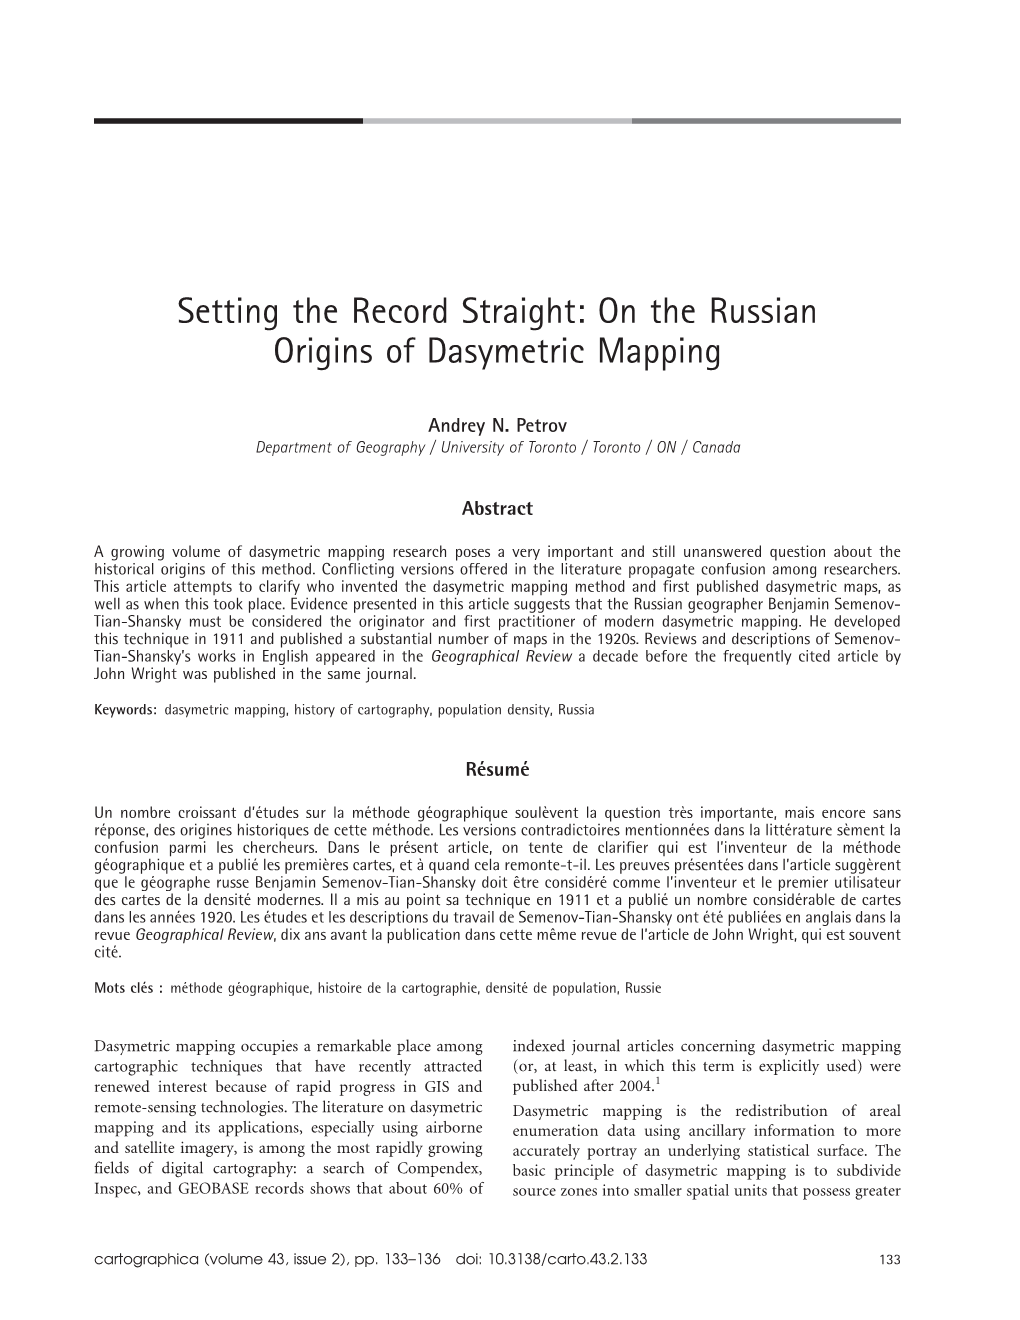 On the Russian Origins of Dasymetric Mapping